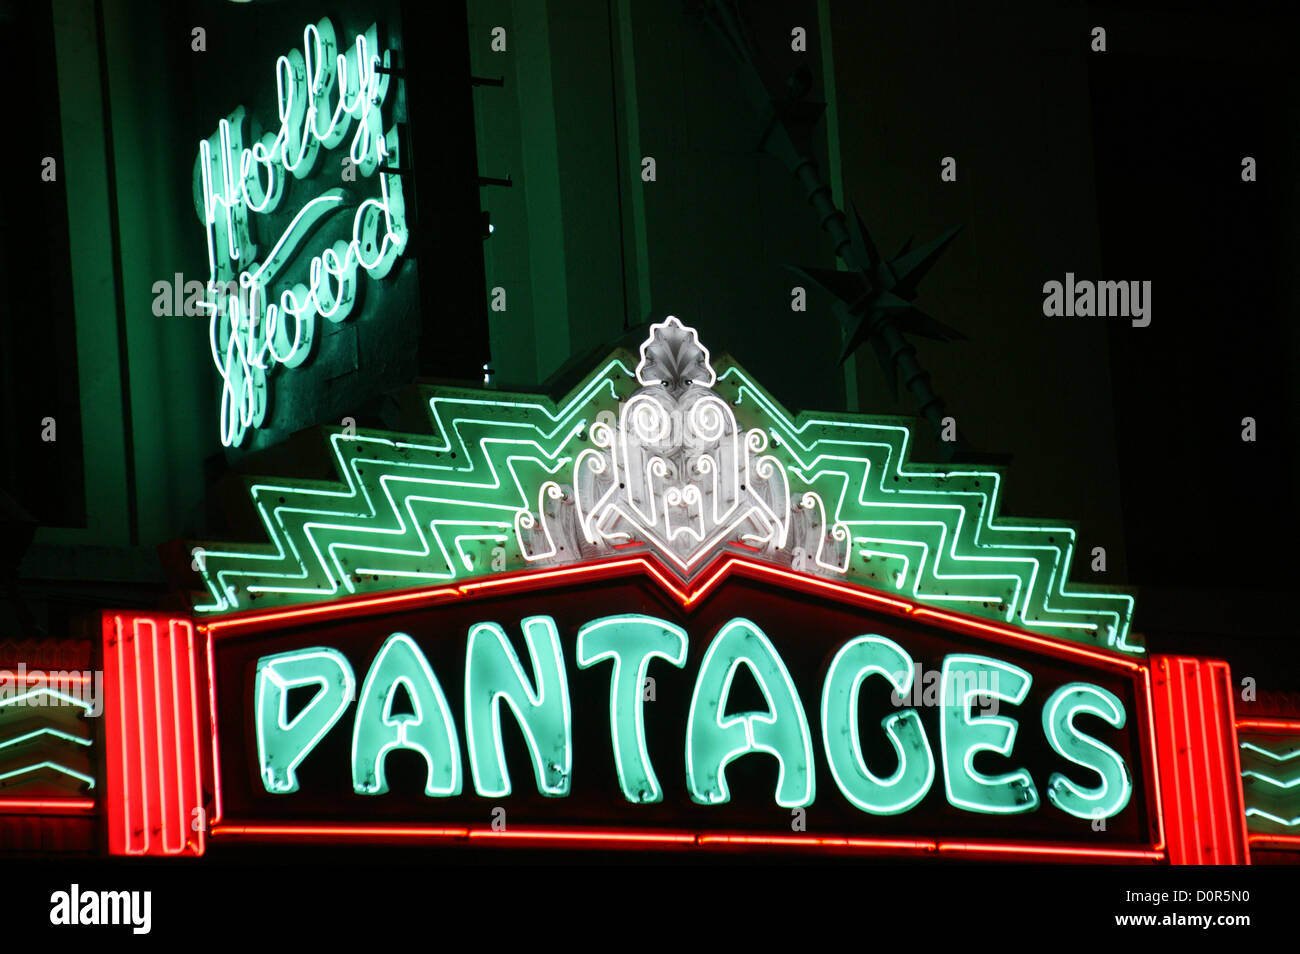 Pantages Theatre neon sign, Los Angeles, CA Stock Photo